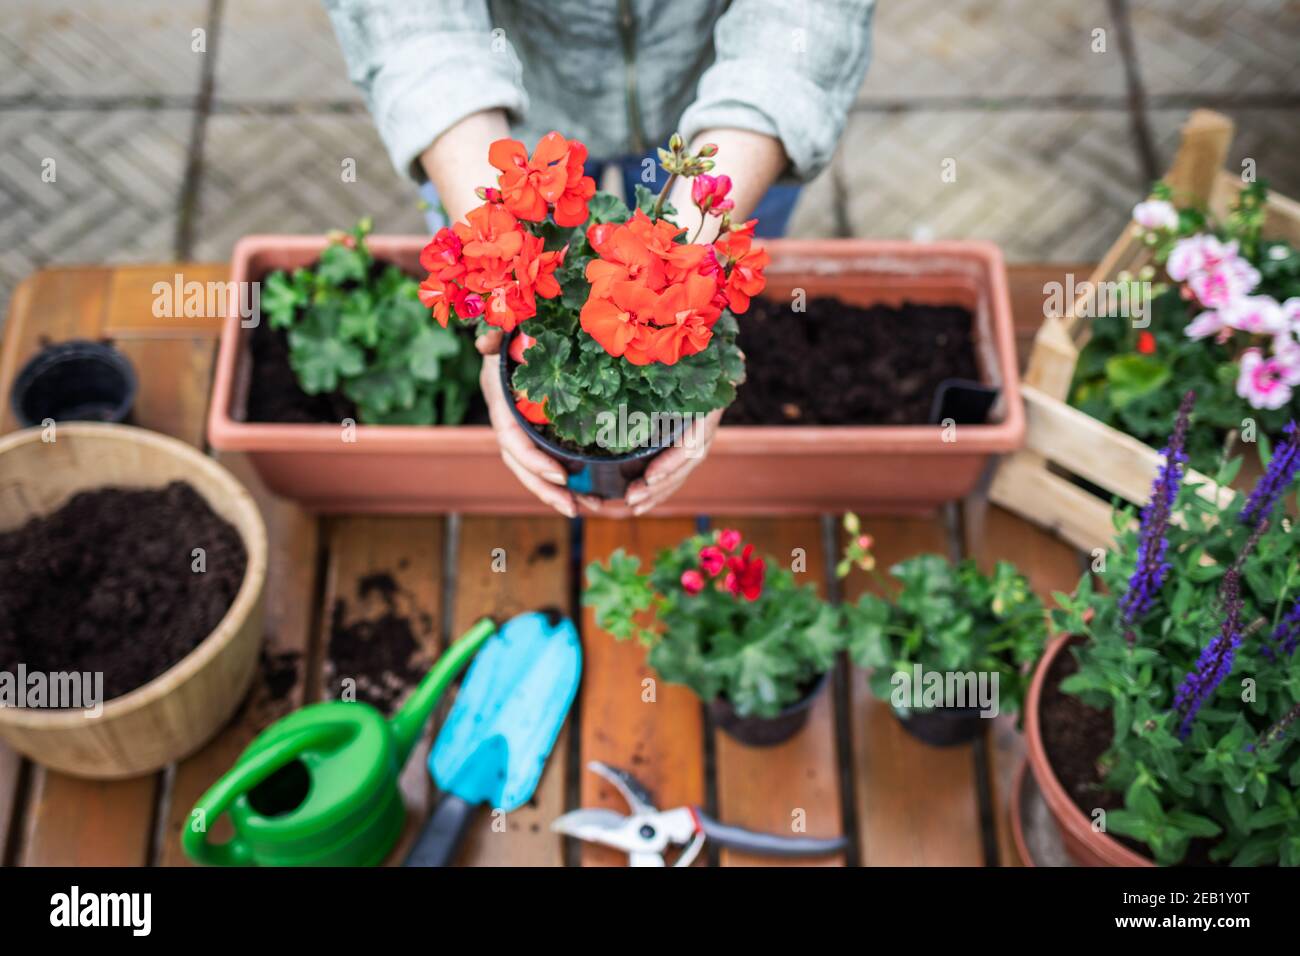 Planting flowers outdoors. Woman holding red geranium flower in hands. Gardening equipment on wooden table Stock Photo